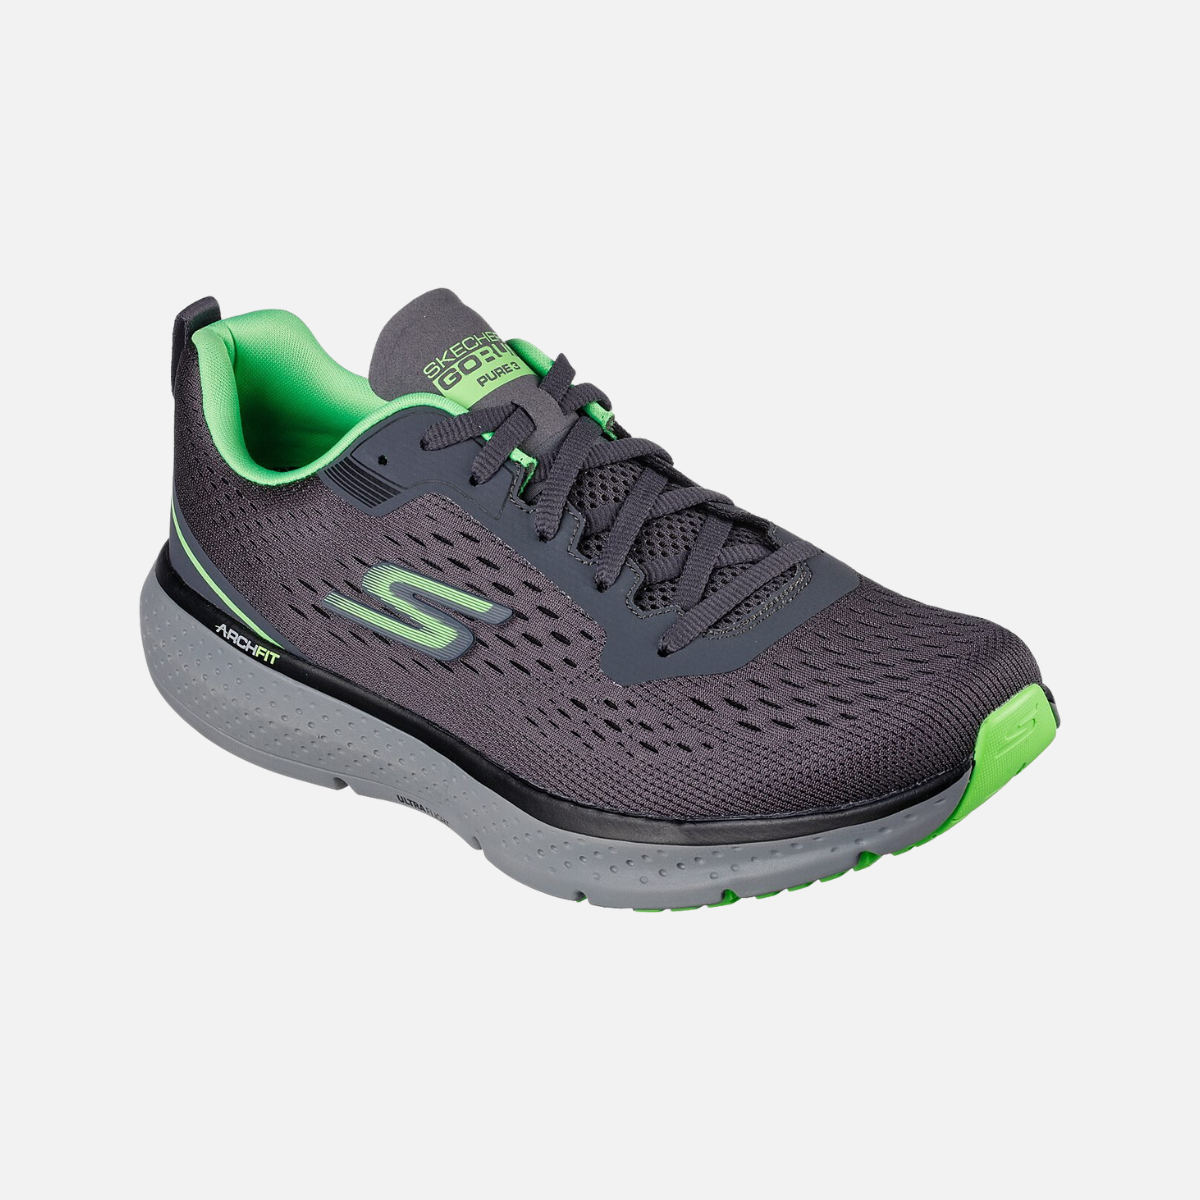 Skechers Go-Run Pure 3 Men's Running Shoes -Charcoal/Lime